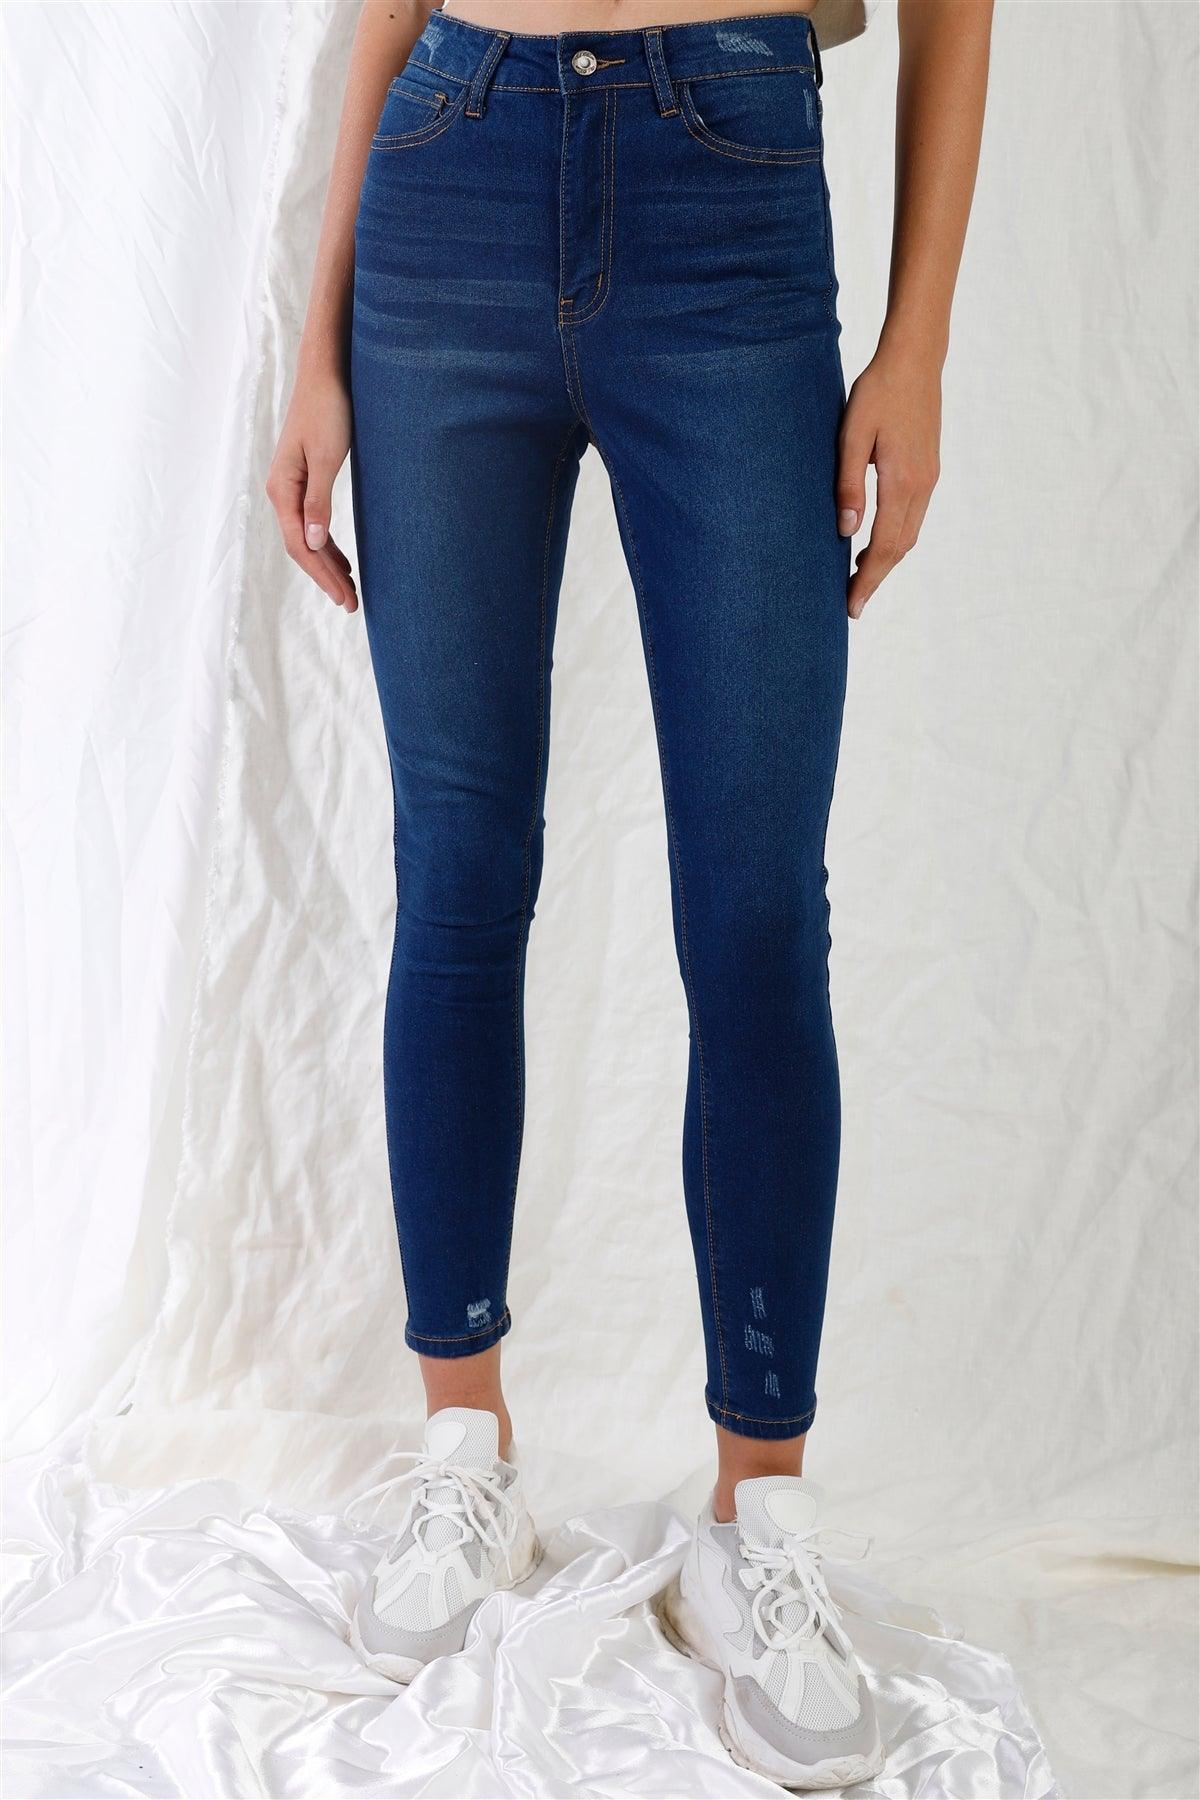 Dark Blue High-Waisted With Rips Skinny Denim Jeans /1-3-3-2-1-1-1